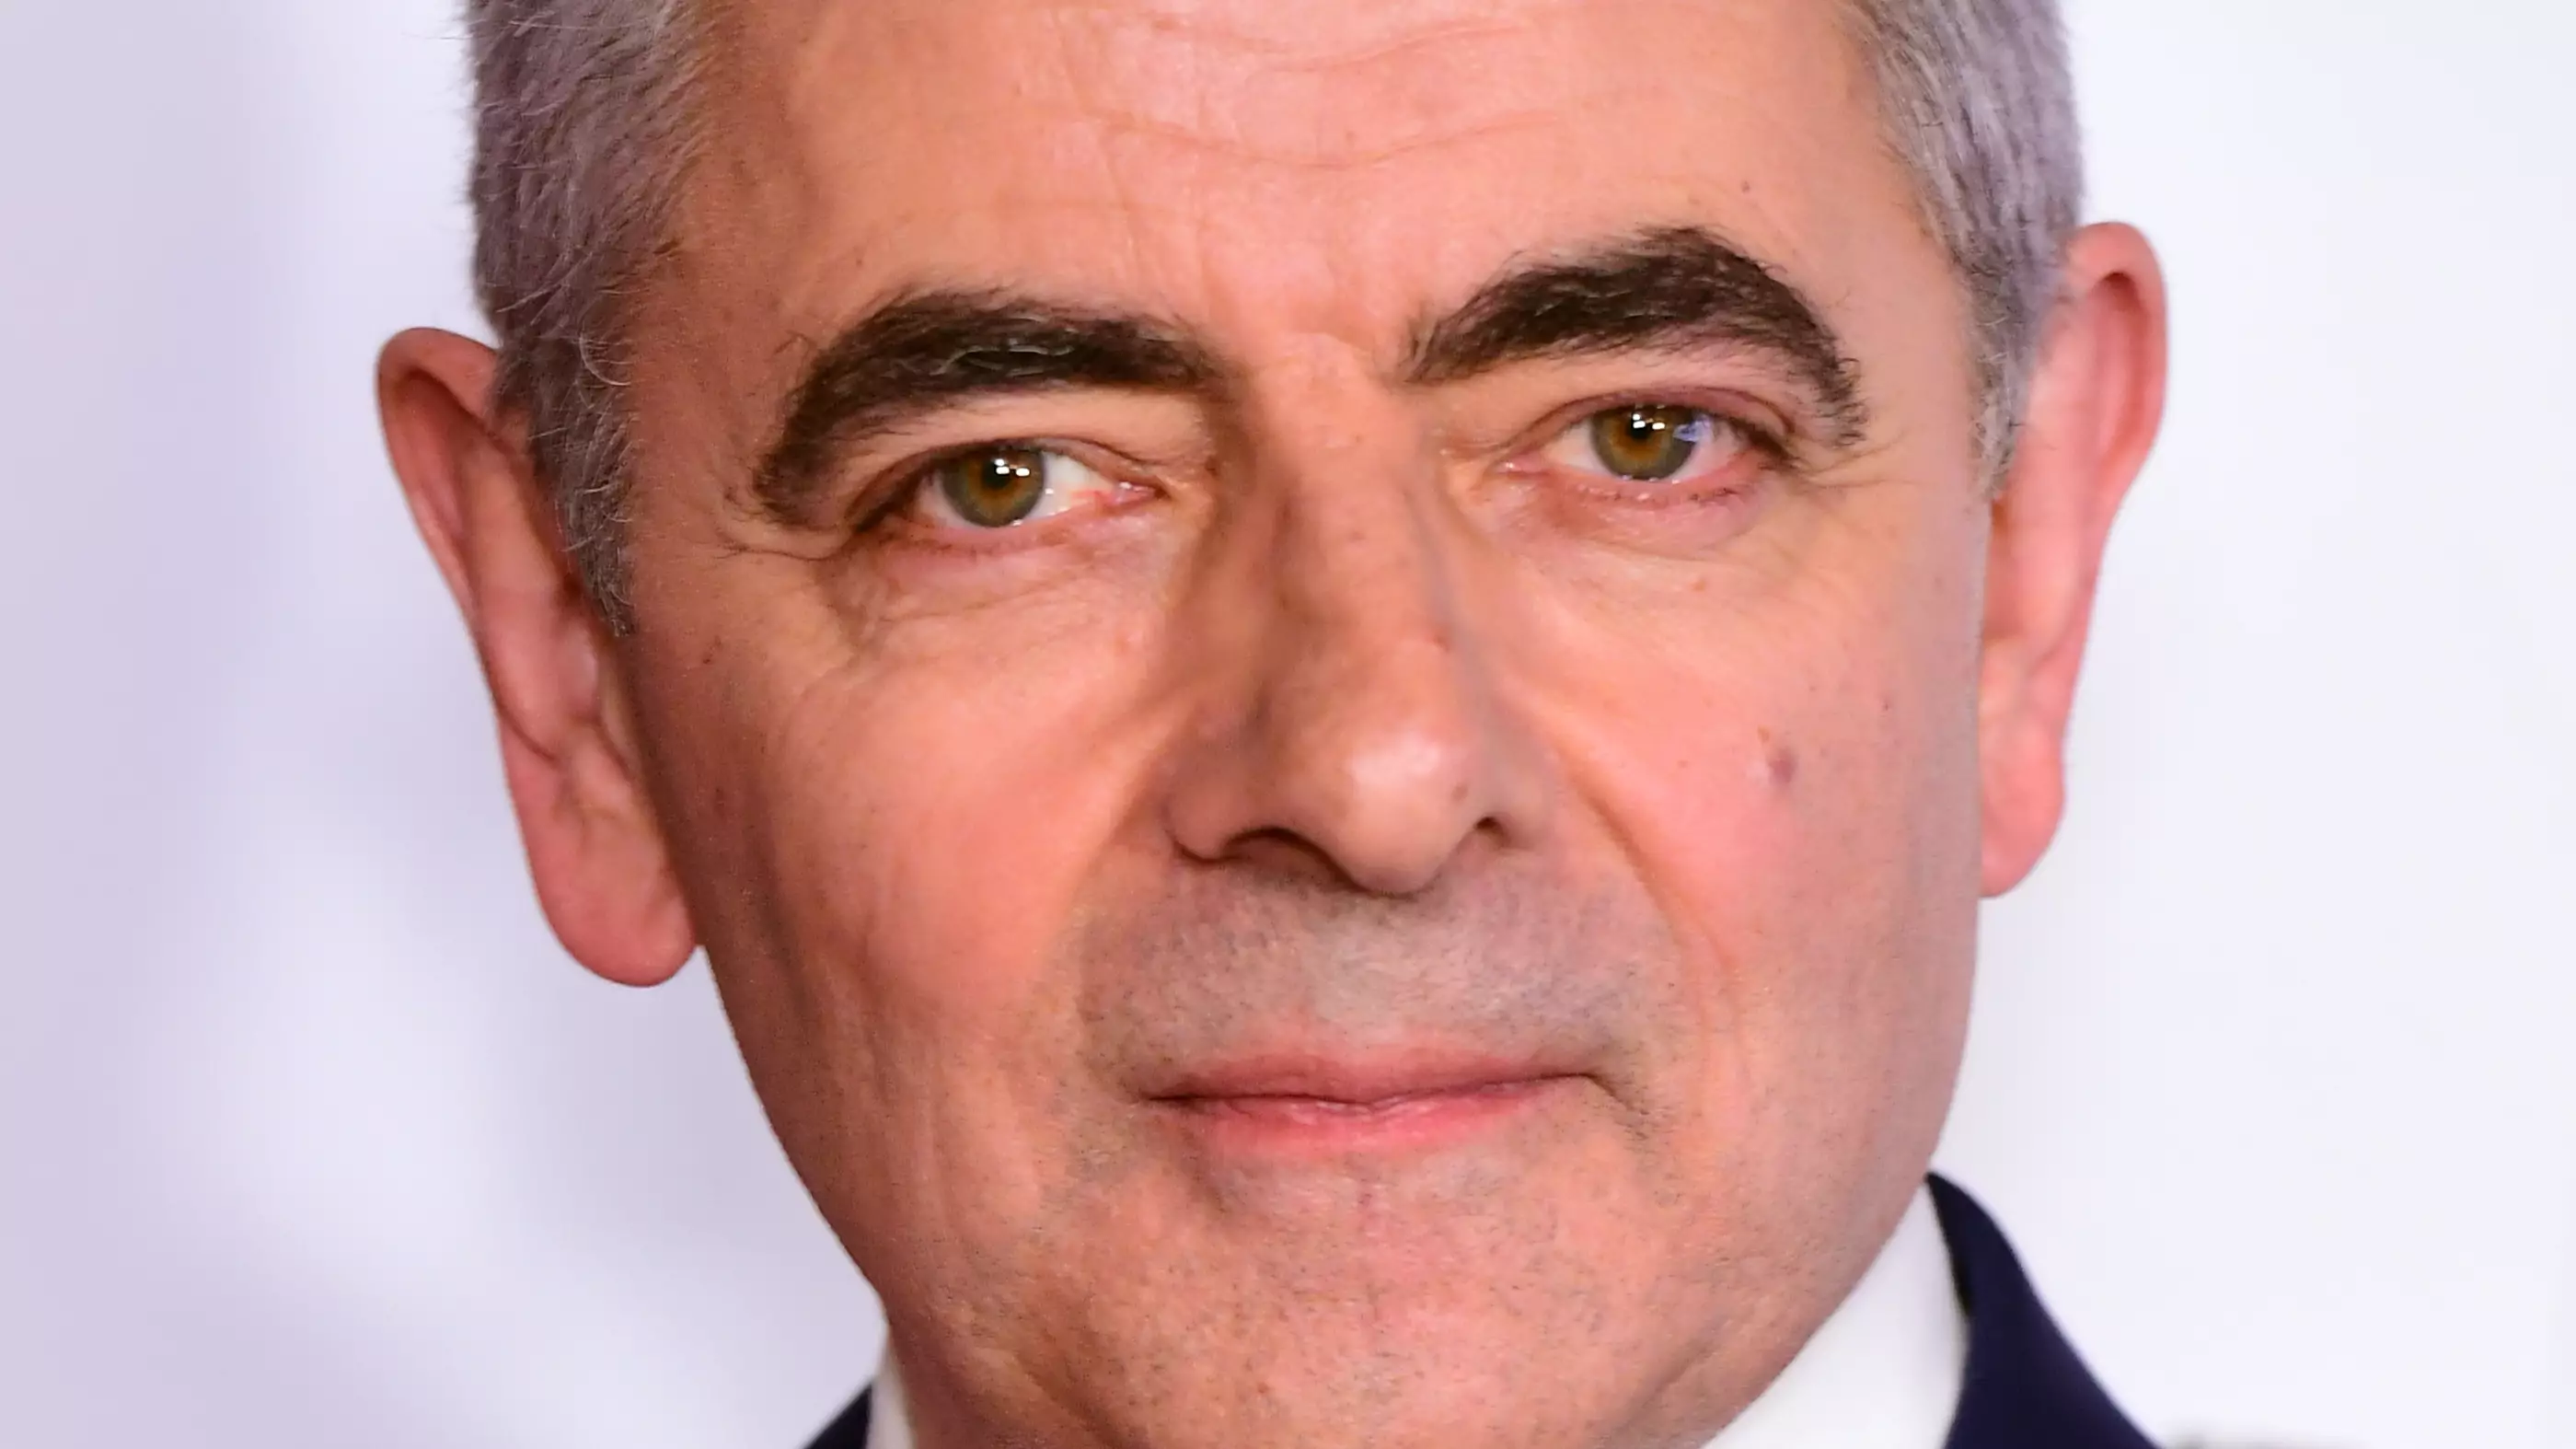 Rowan Atkinson Reckons Cancel Culture Is Like 'Medieval Mob Looking For Someone To Burn'